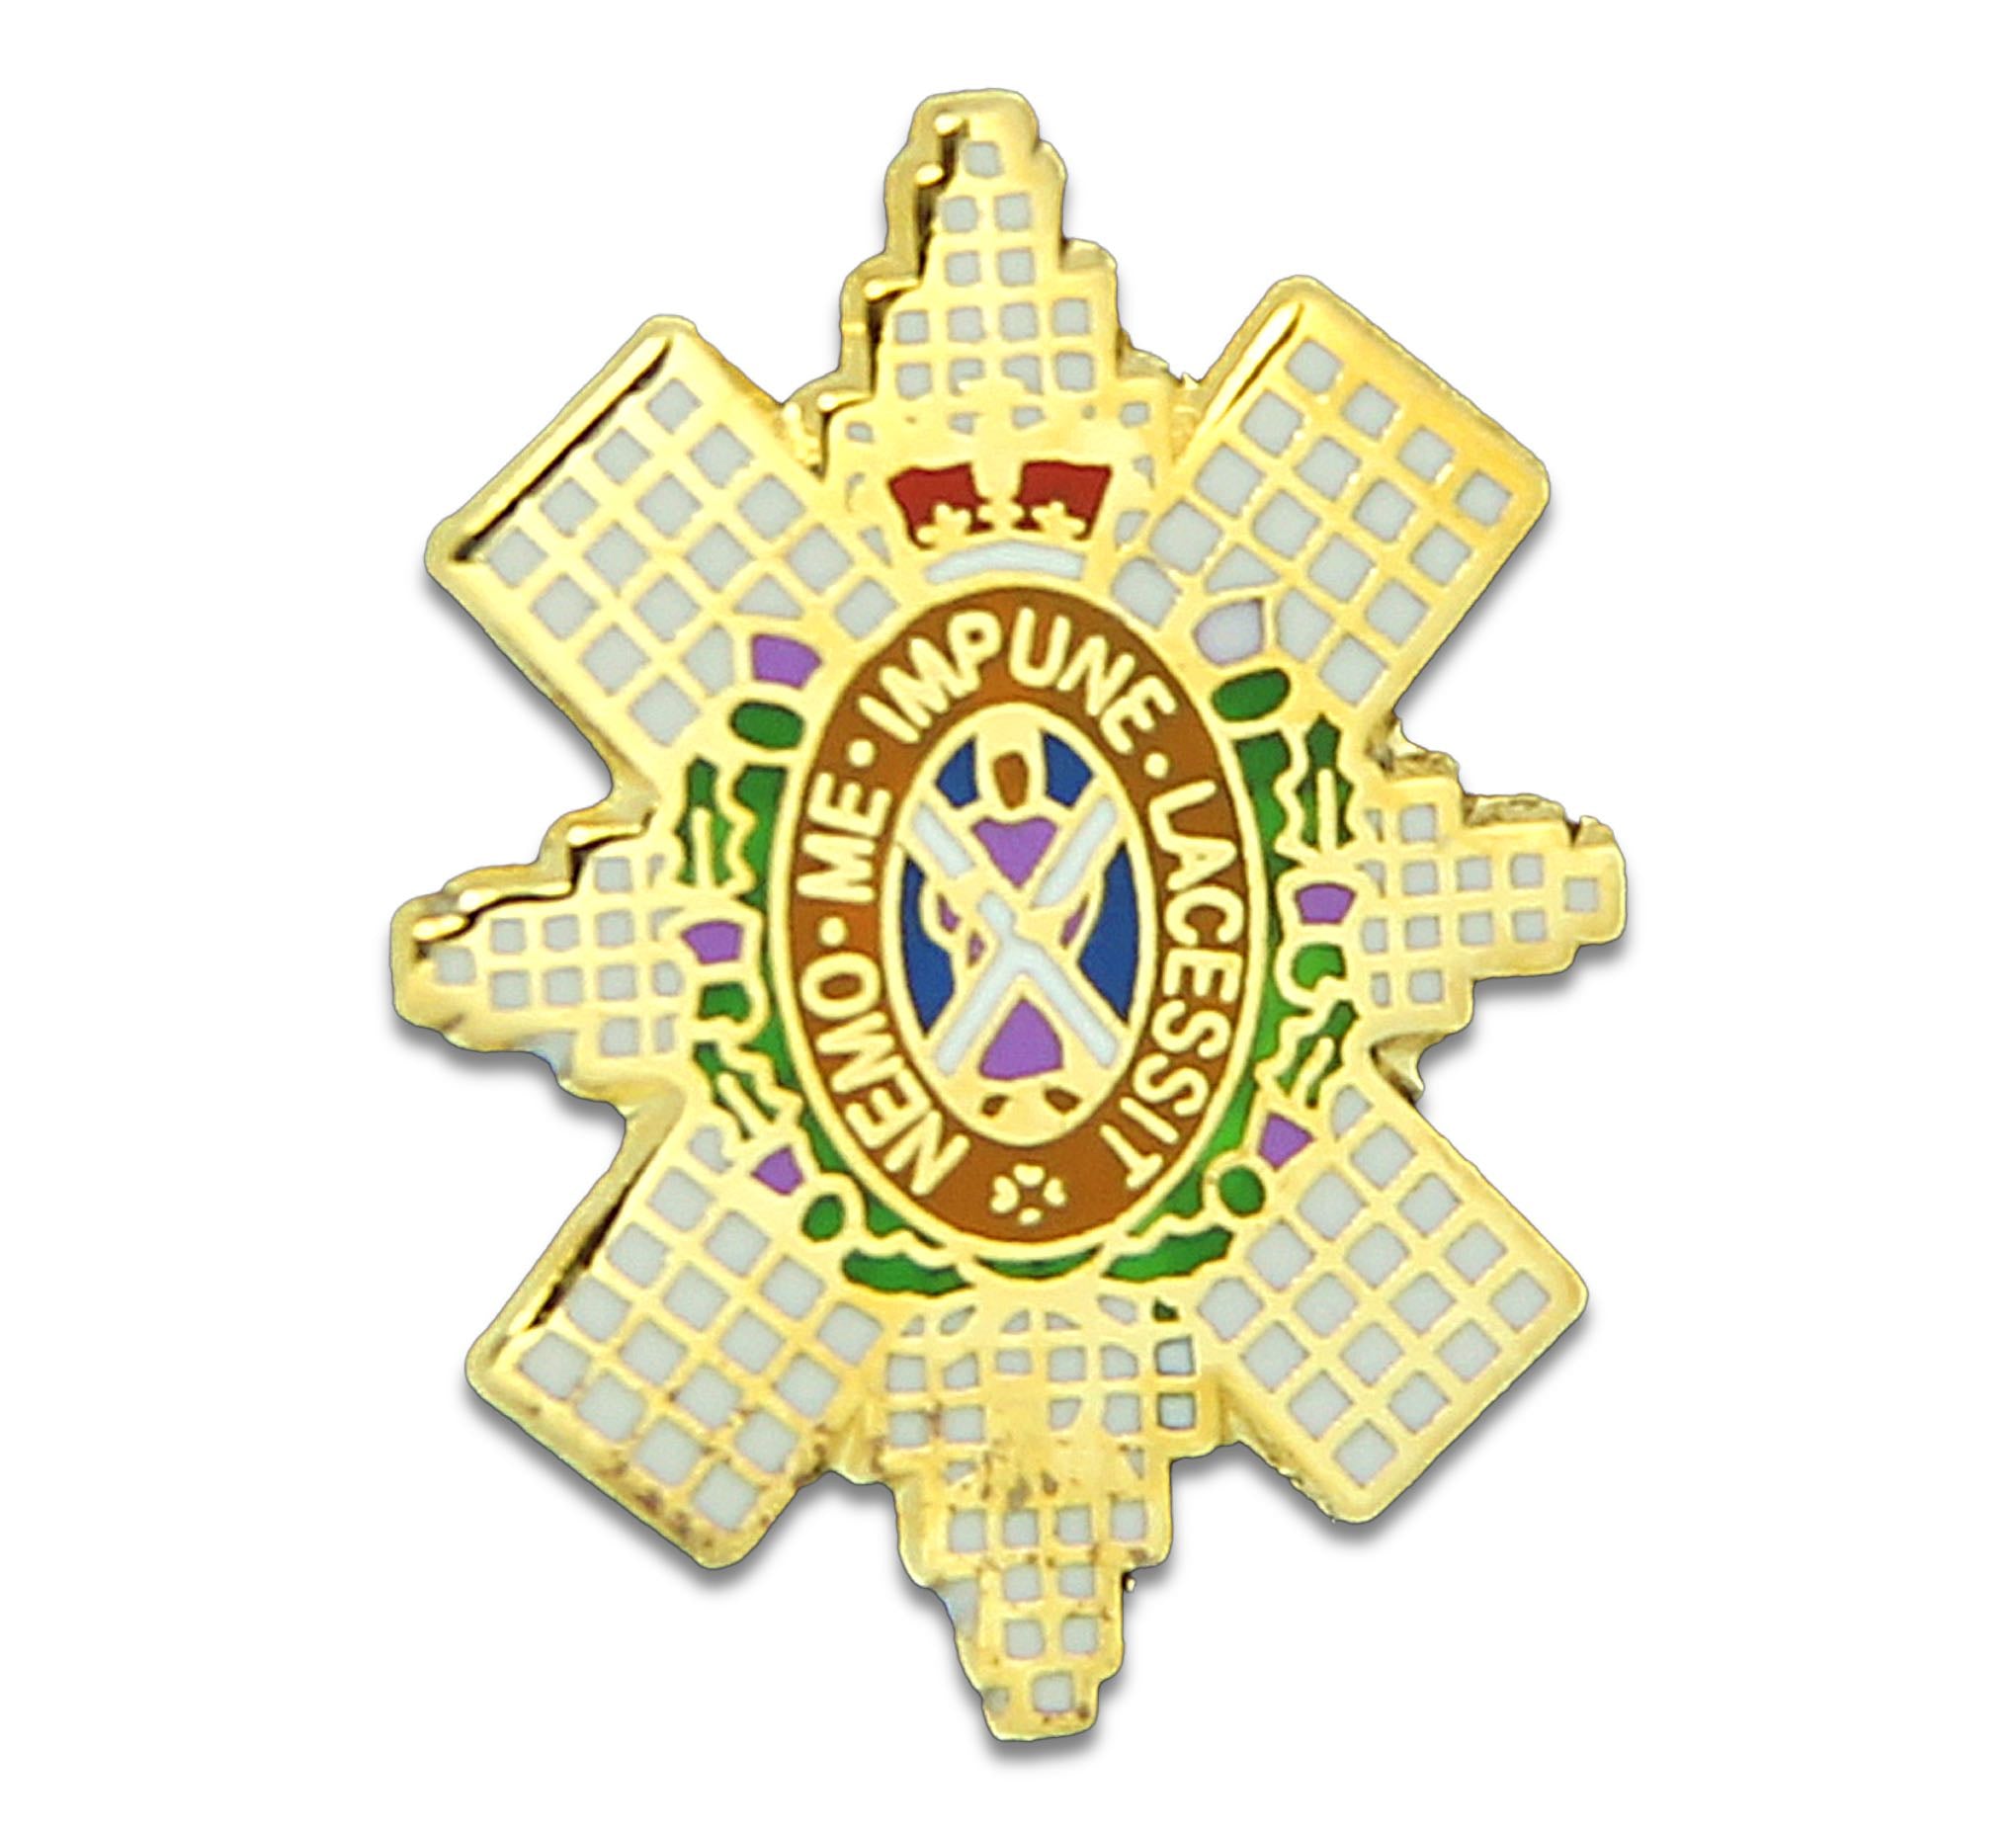 Watch and Report Badge